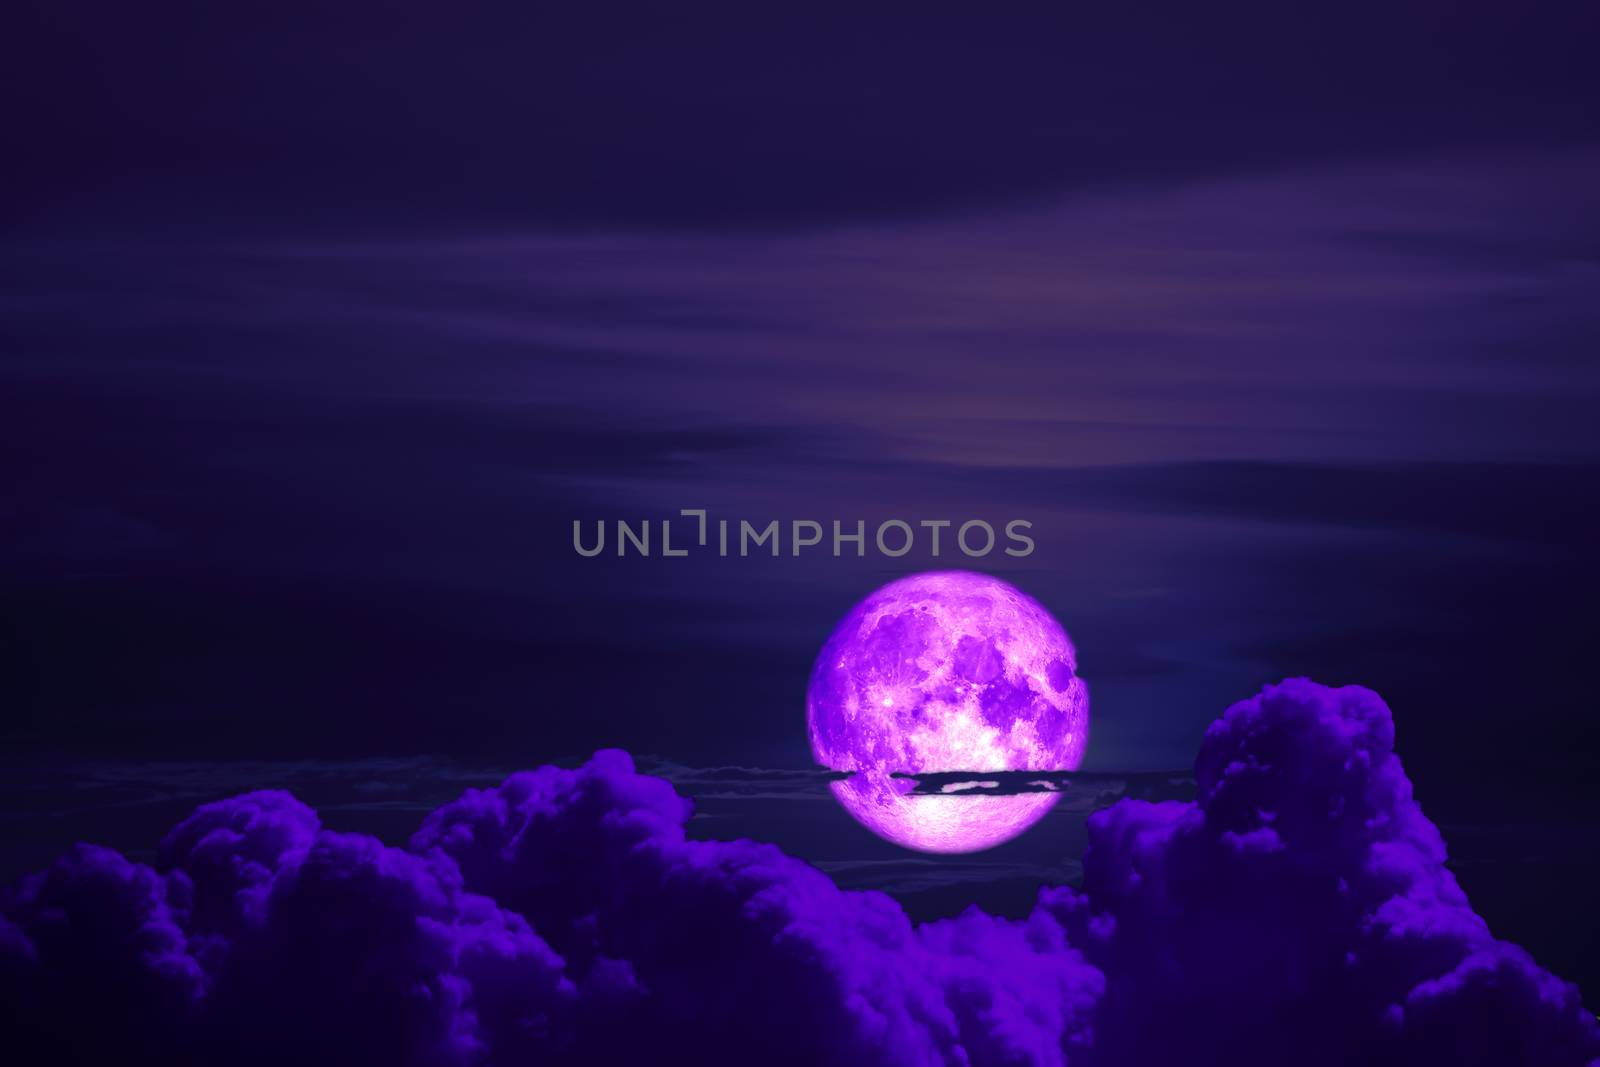 old moon back on silhouette colorful heap cloud on night sky, Elements of this image furnished by NASA